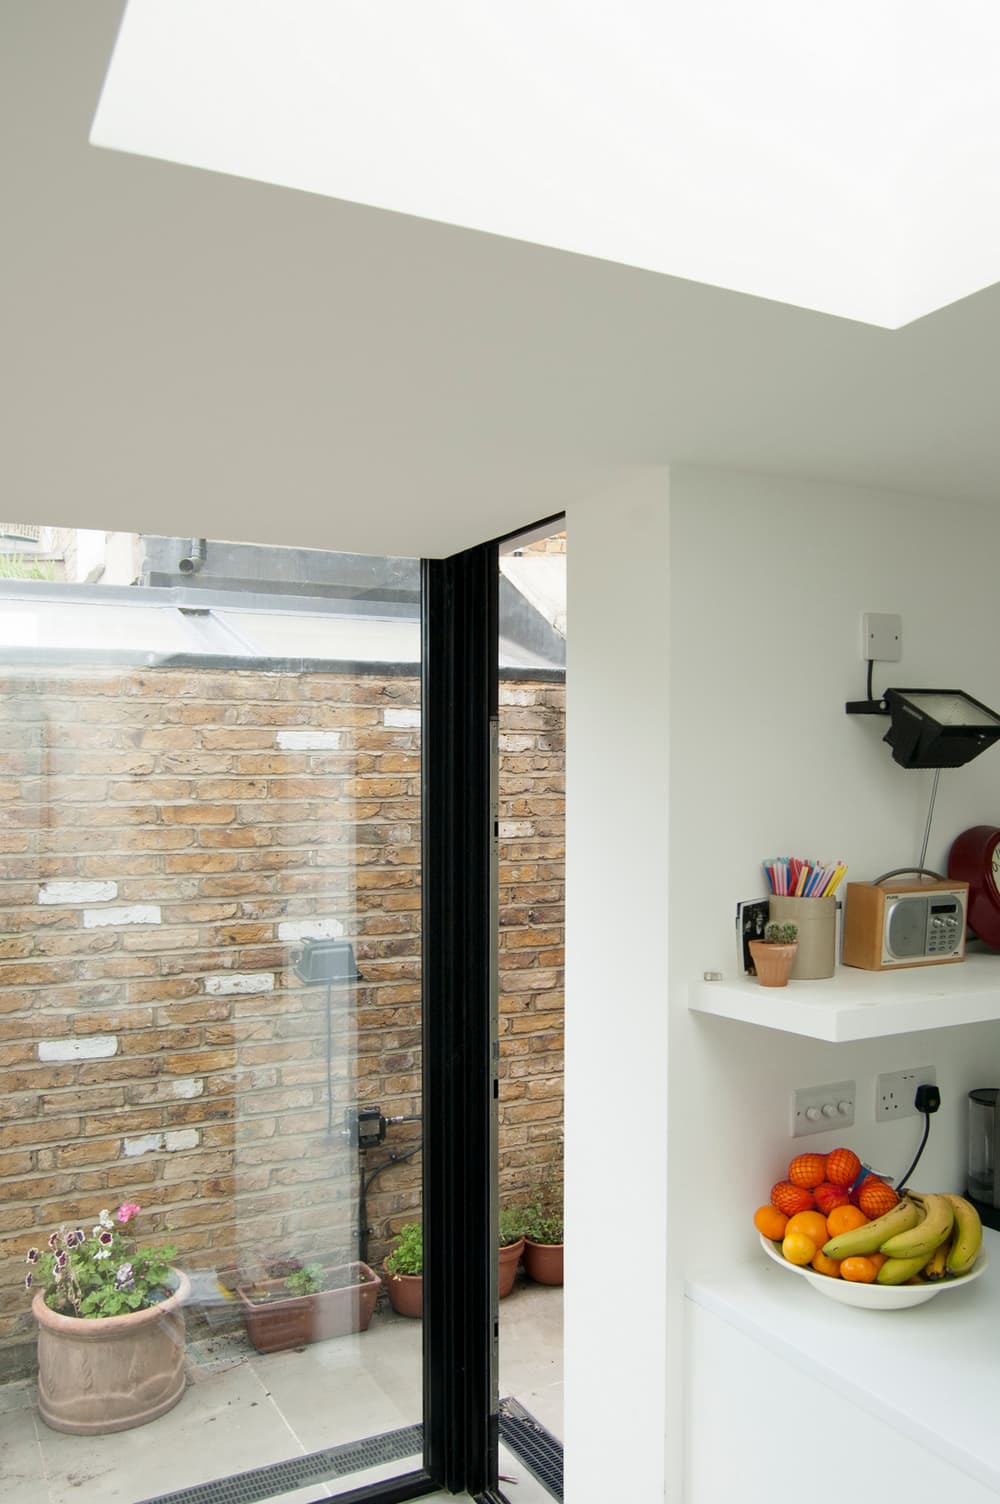 Three-Sided Glass Extension to a Victorian Terrace House in North London